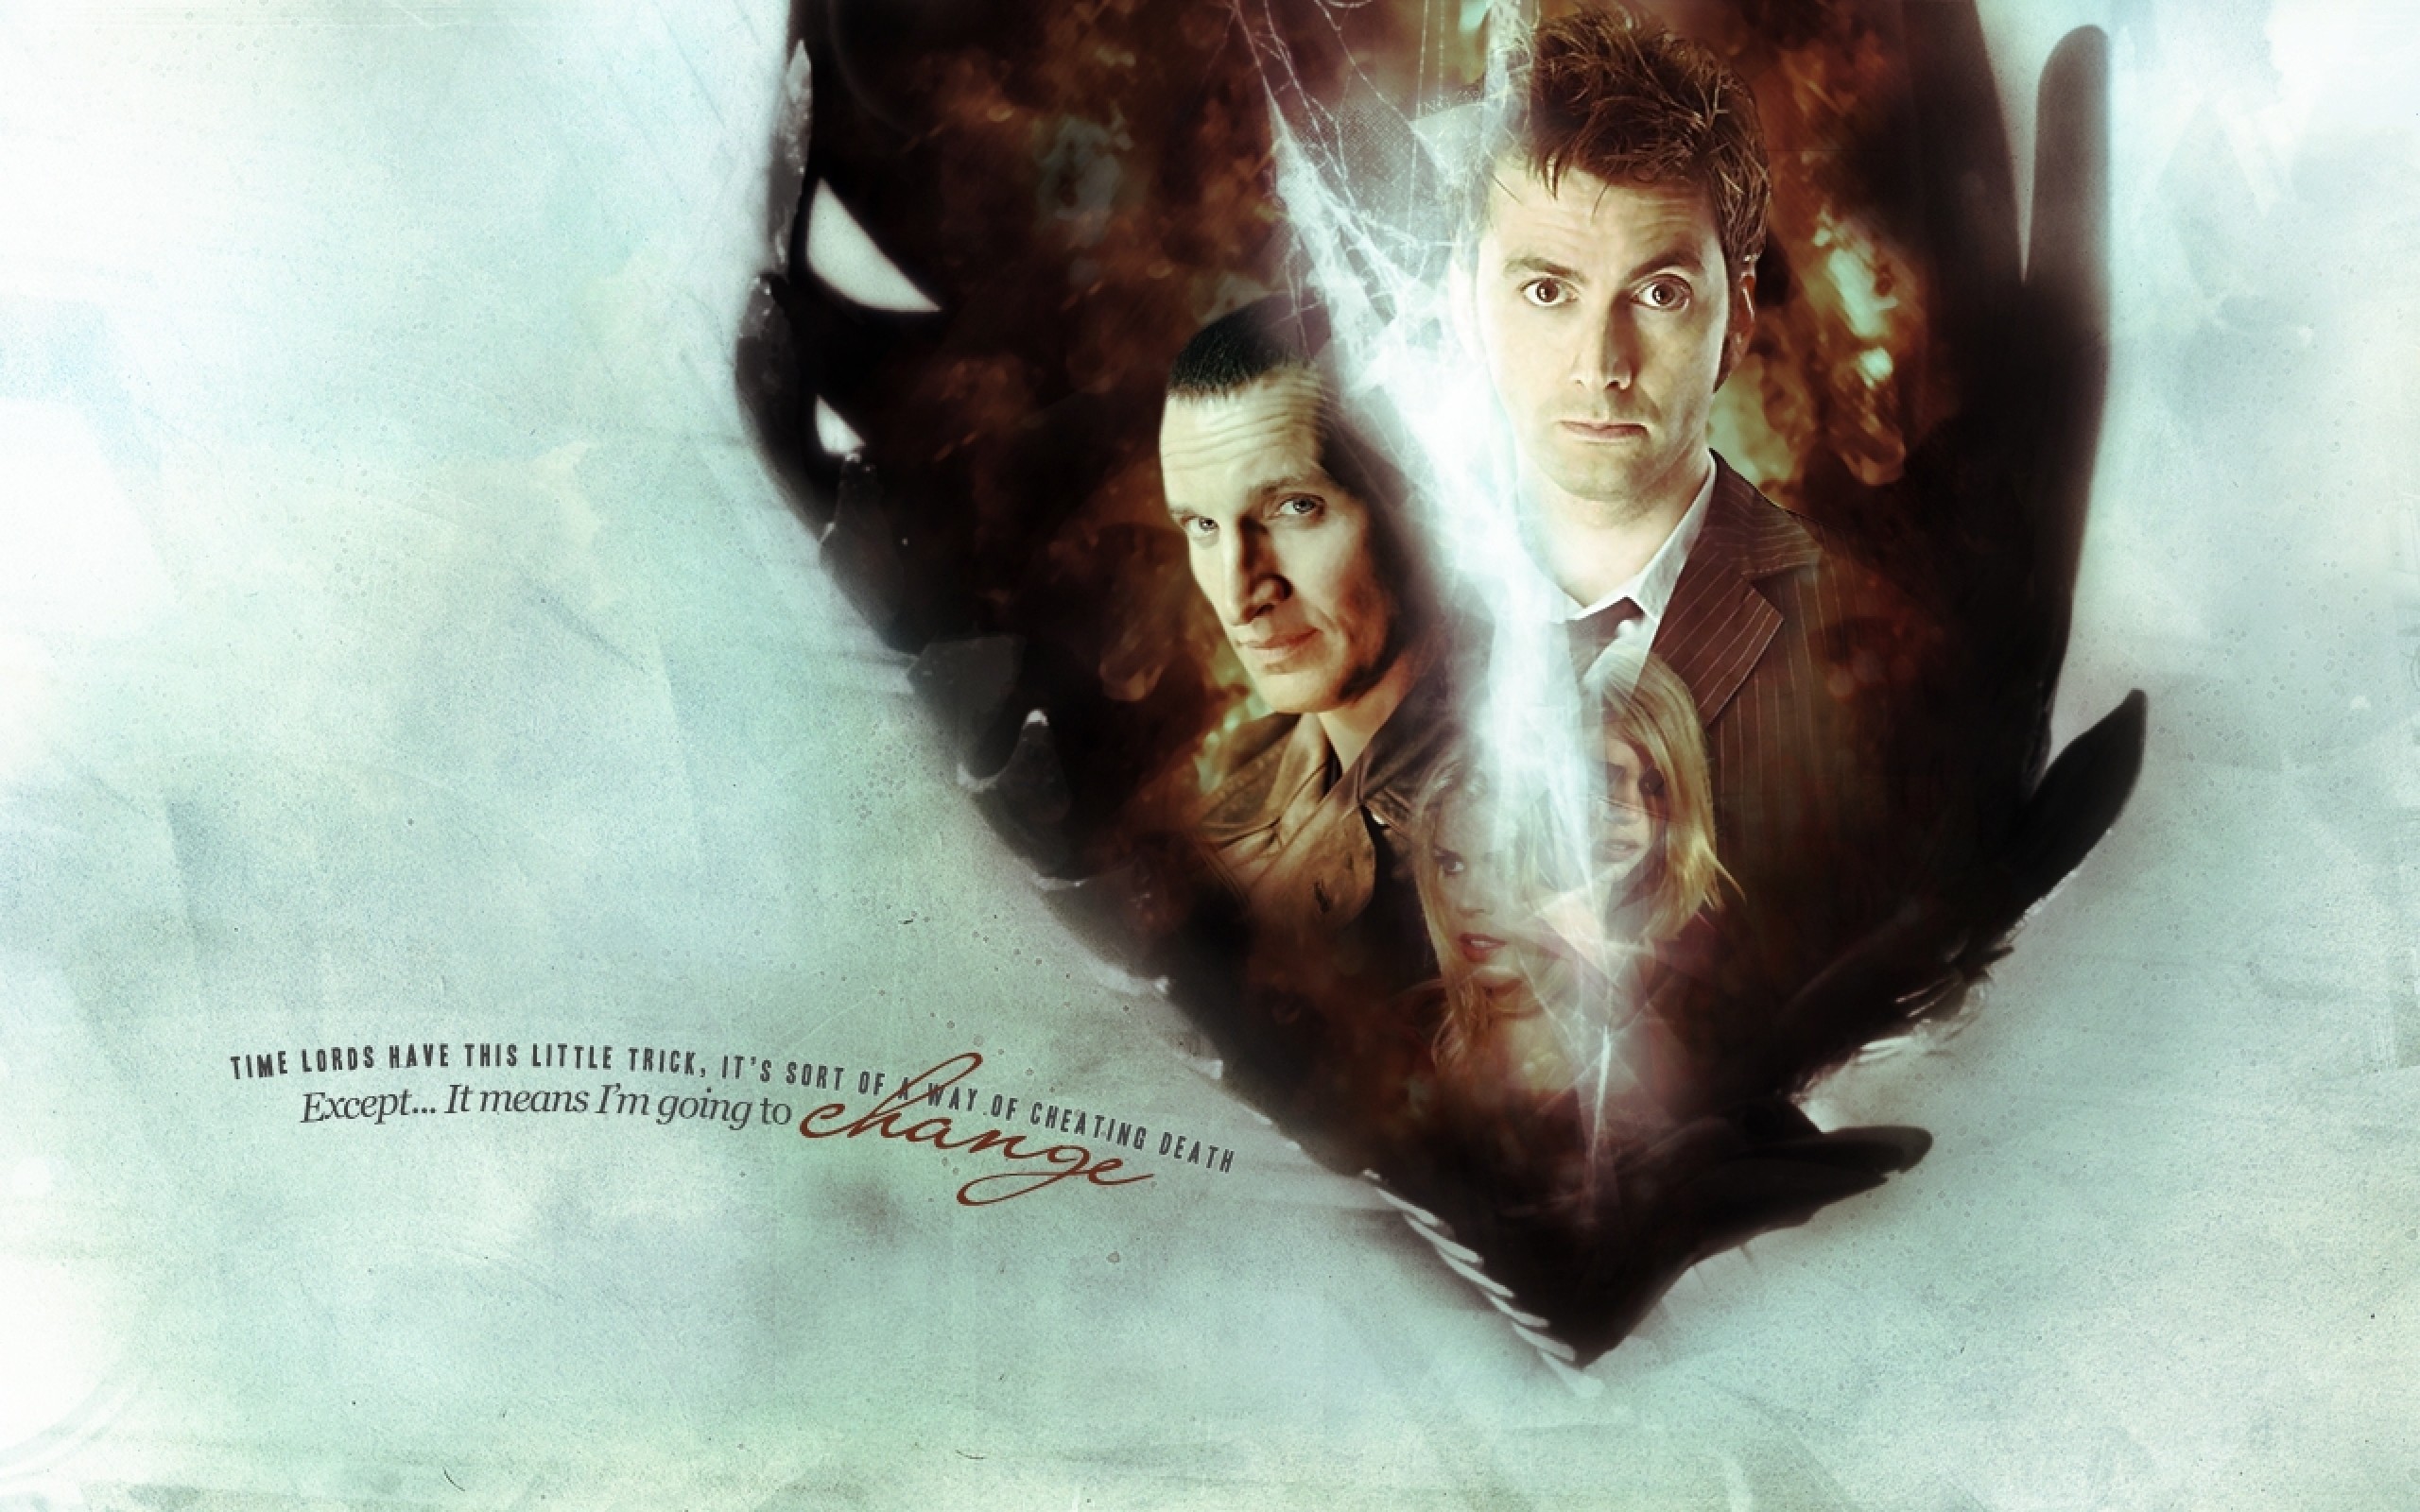 Doctor Who, The Doctor, TARDIS, Christopher Eccleston, David Tennant, Billie Piper, Tenth Doctor, Quote, Rose Tyler Wallpaper